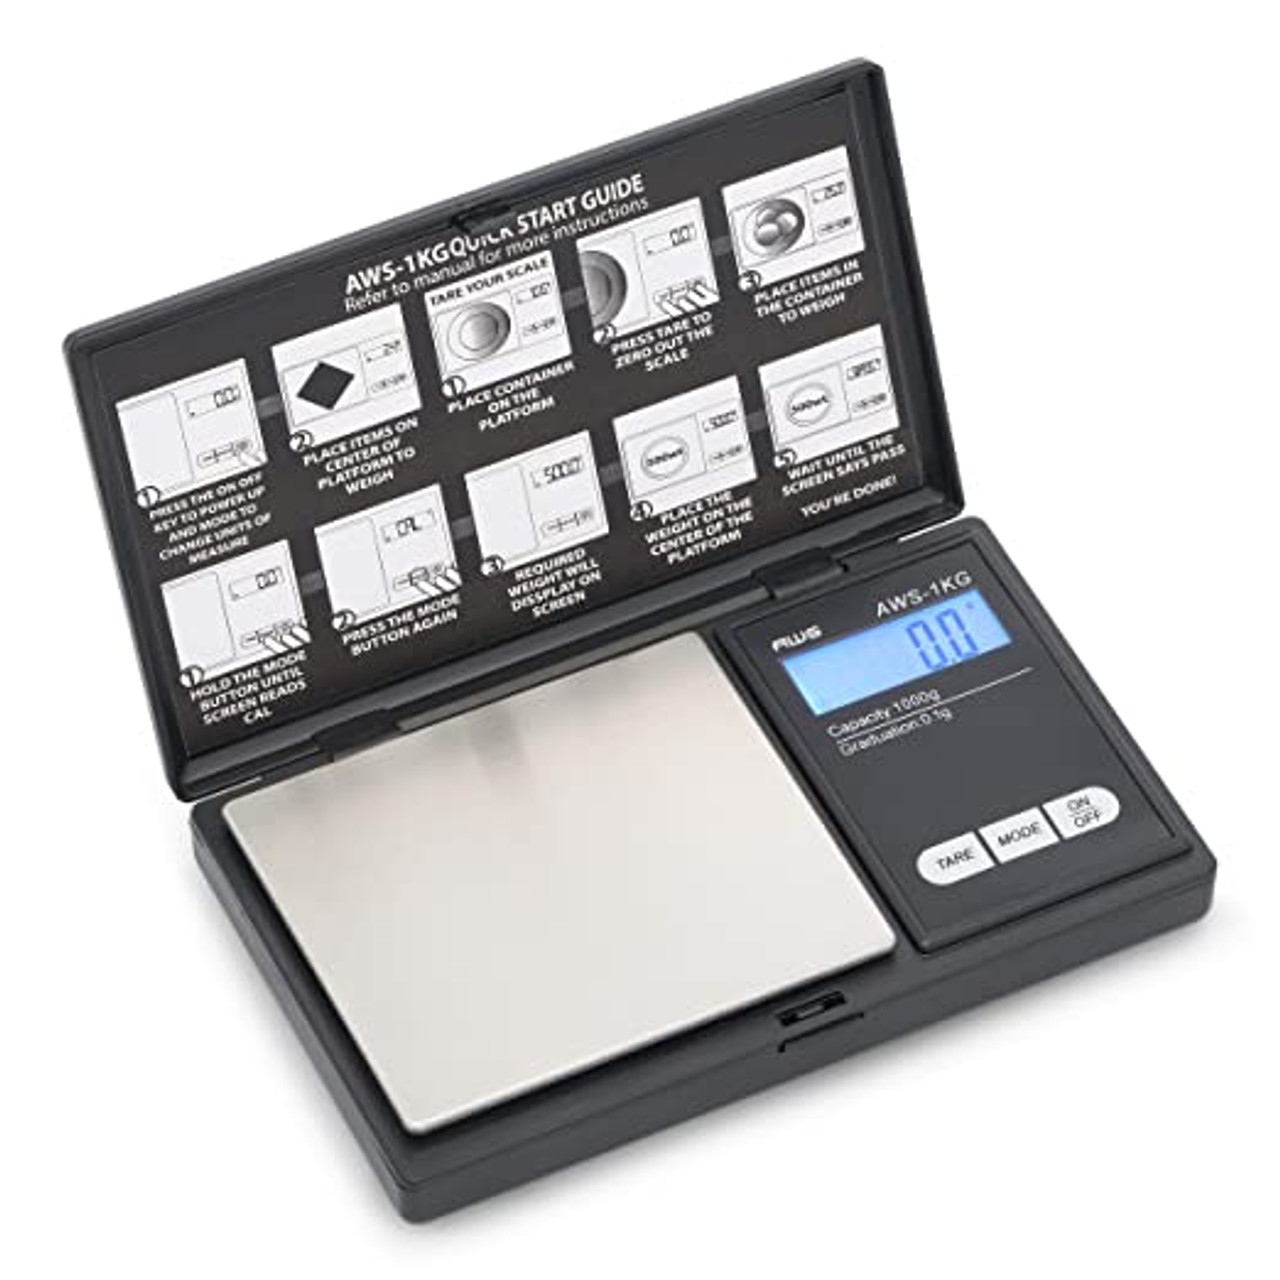 AWS Signature Series Digital Pocket scale 1kg x 0.1g | Assorted Colors